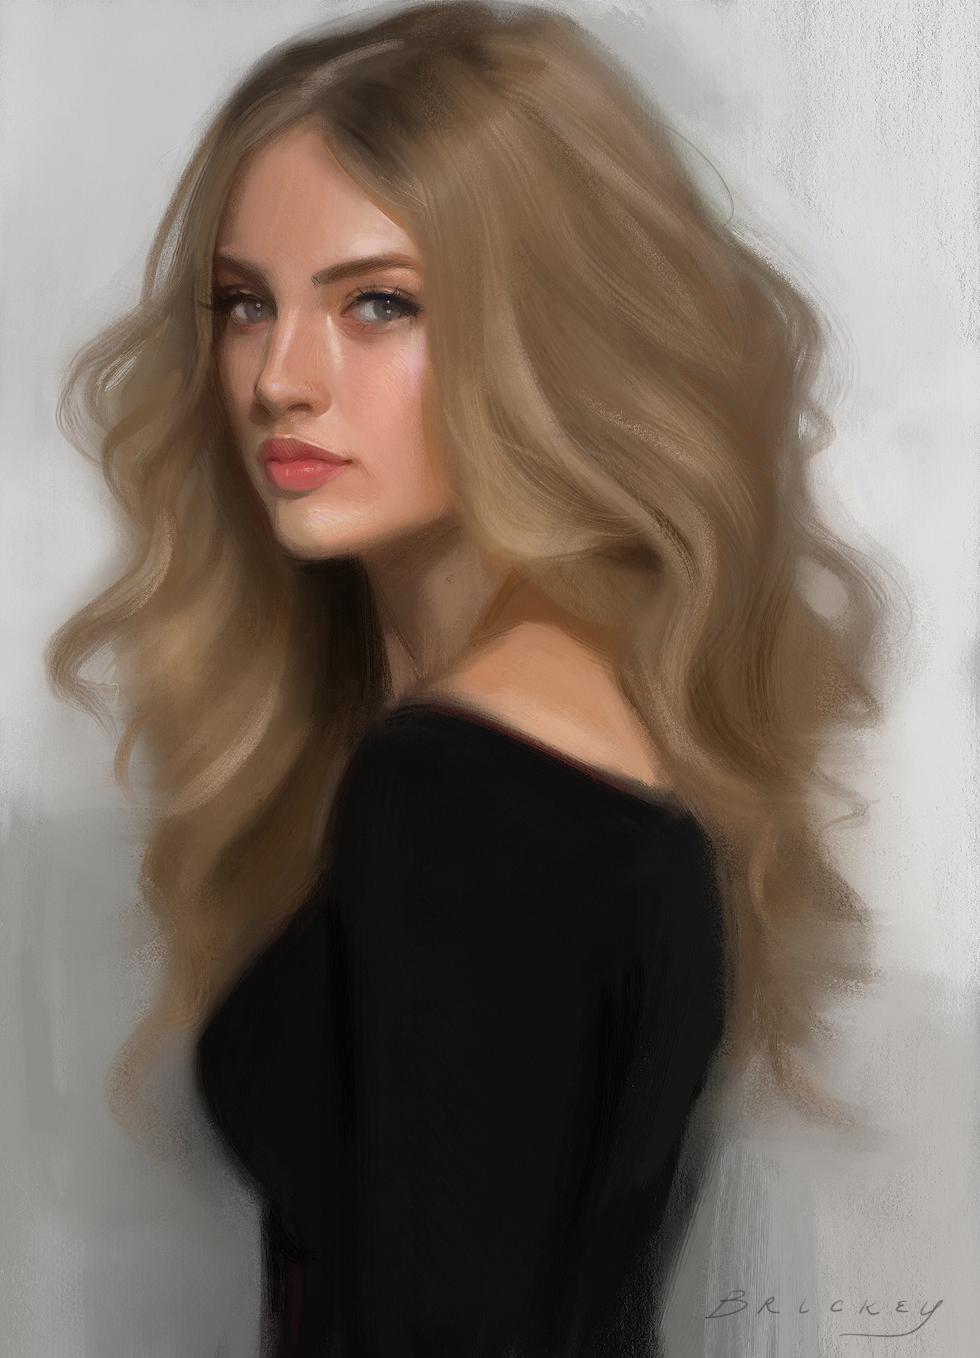 Painting in Procreate